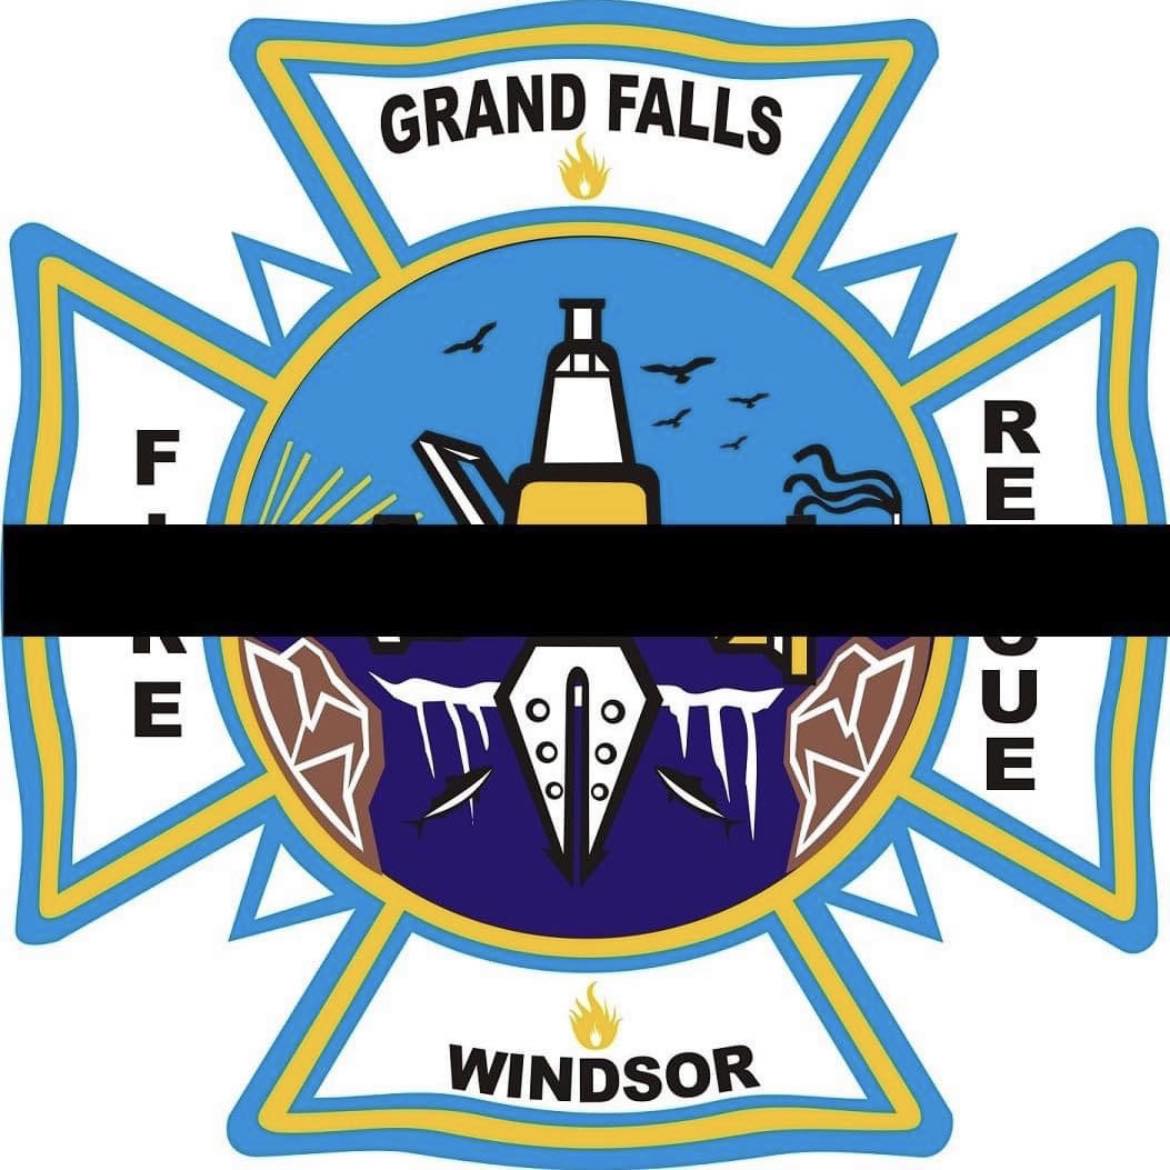 Our deepest condolences to Peter Anstey family, friends and fire family of the Grand Falls-Windsor Fire Department. Peter Anstey served as a Dispatcher there and was a veteran volunteer firefighter for over 20 years. You will be greatly Missed.